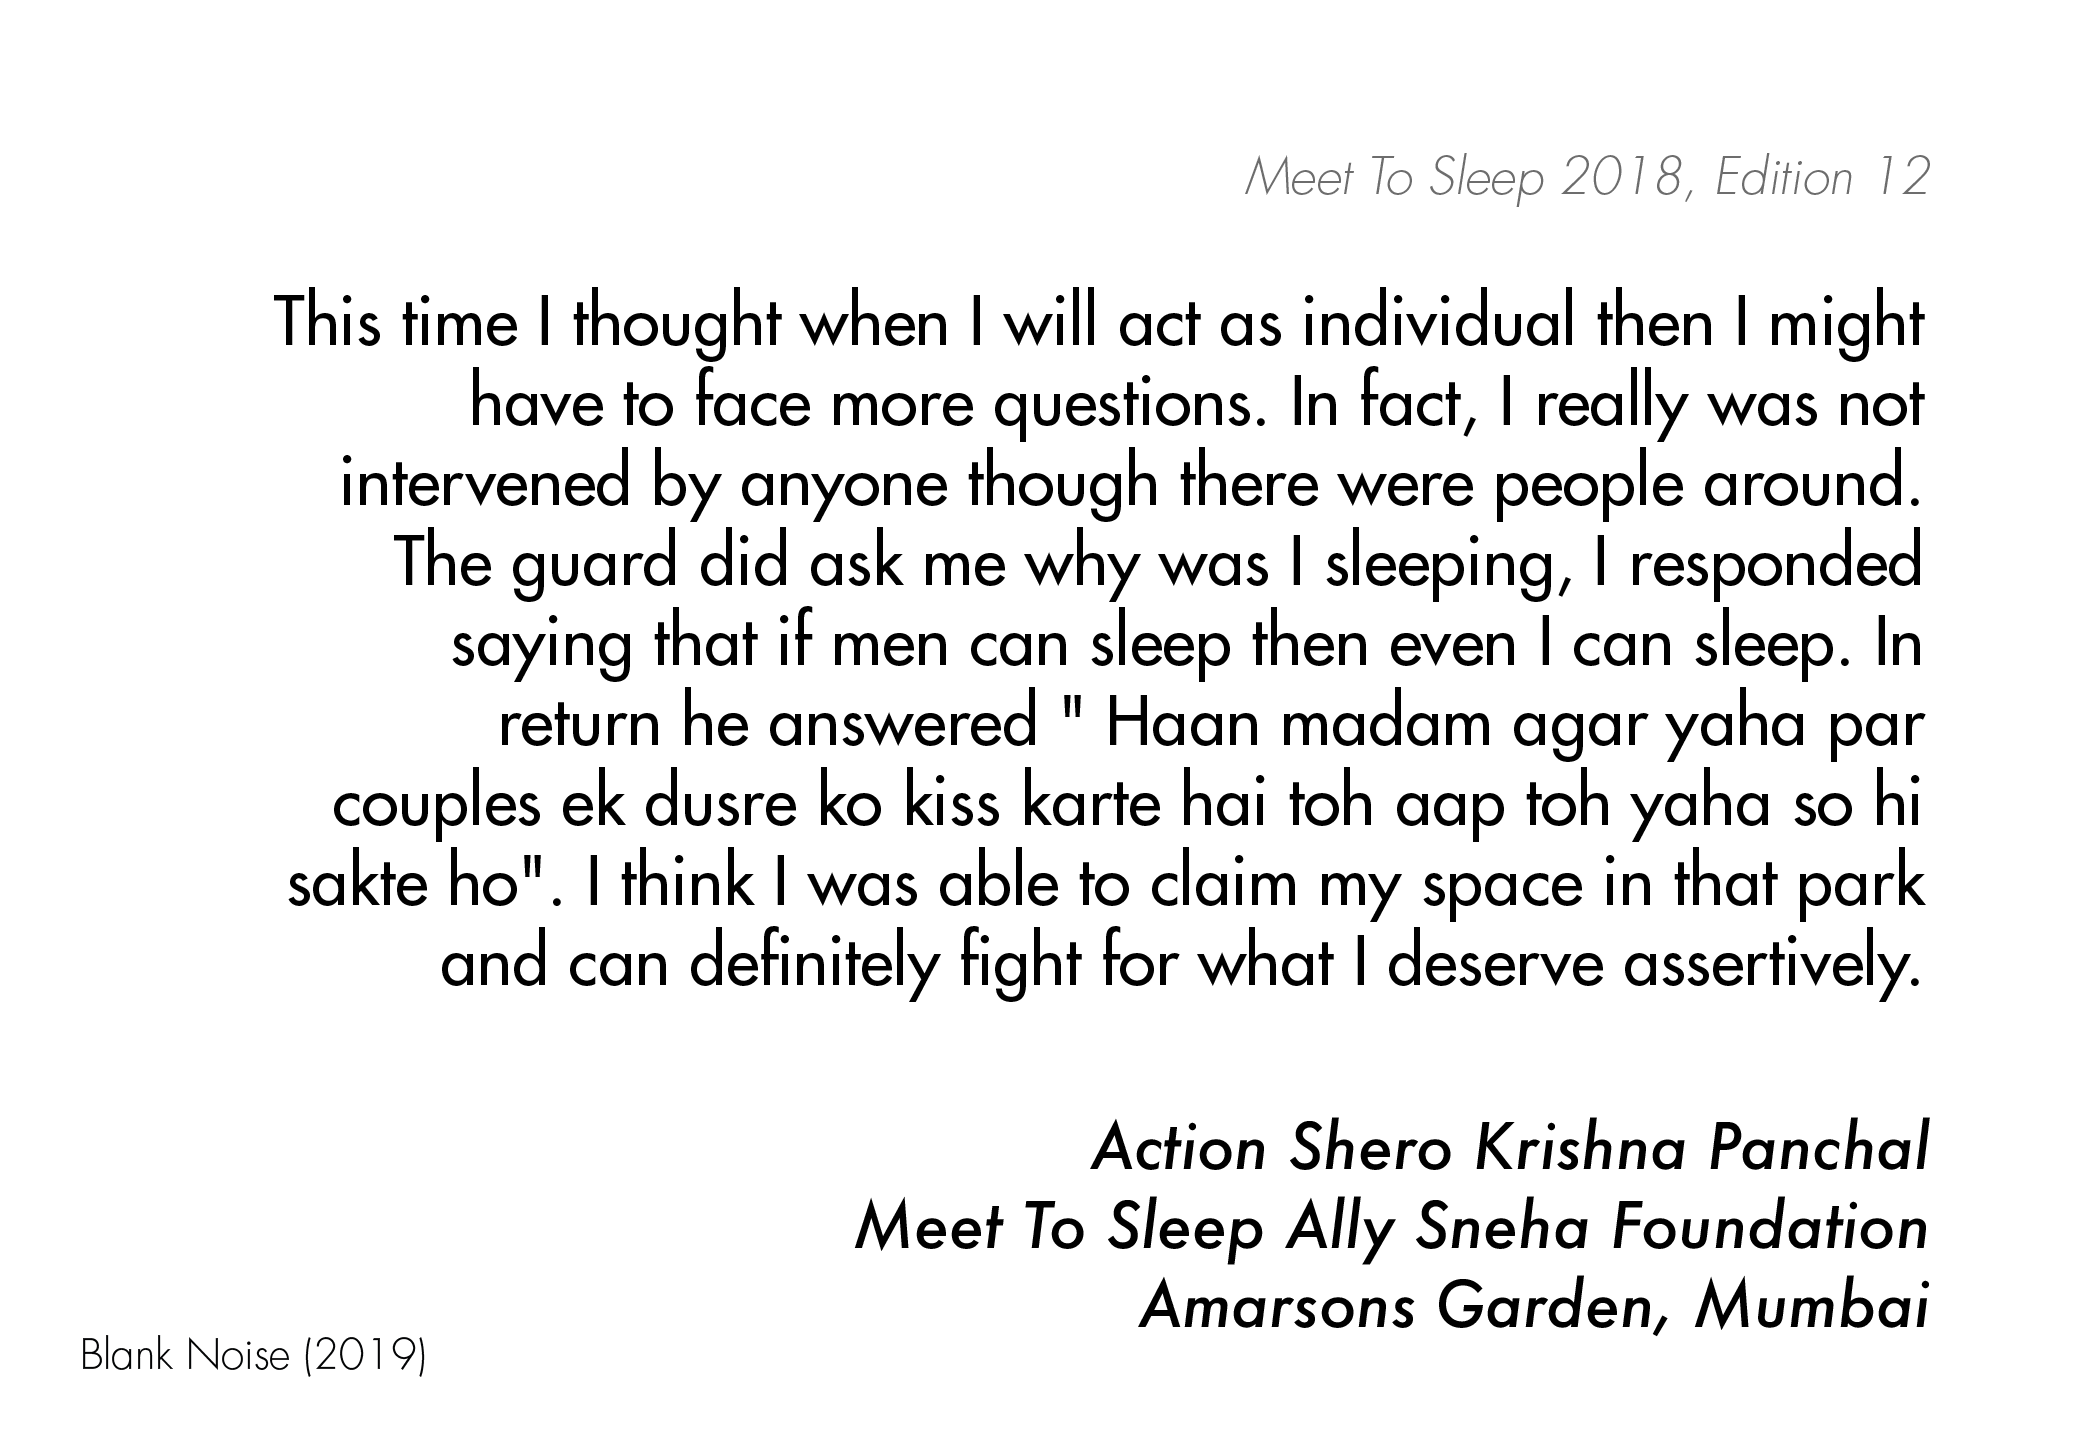 MTS 2018 Quotes -27.png